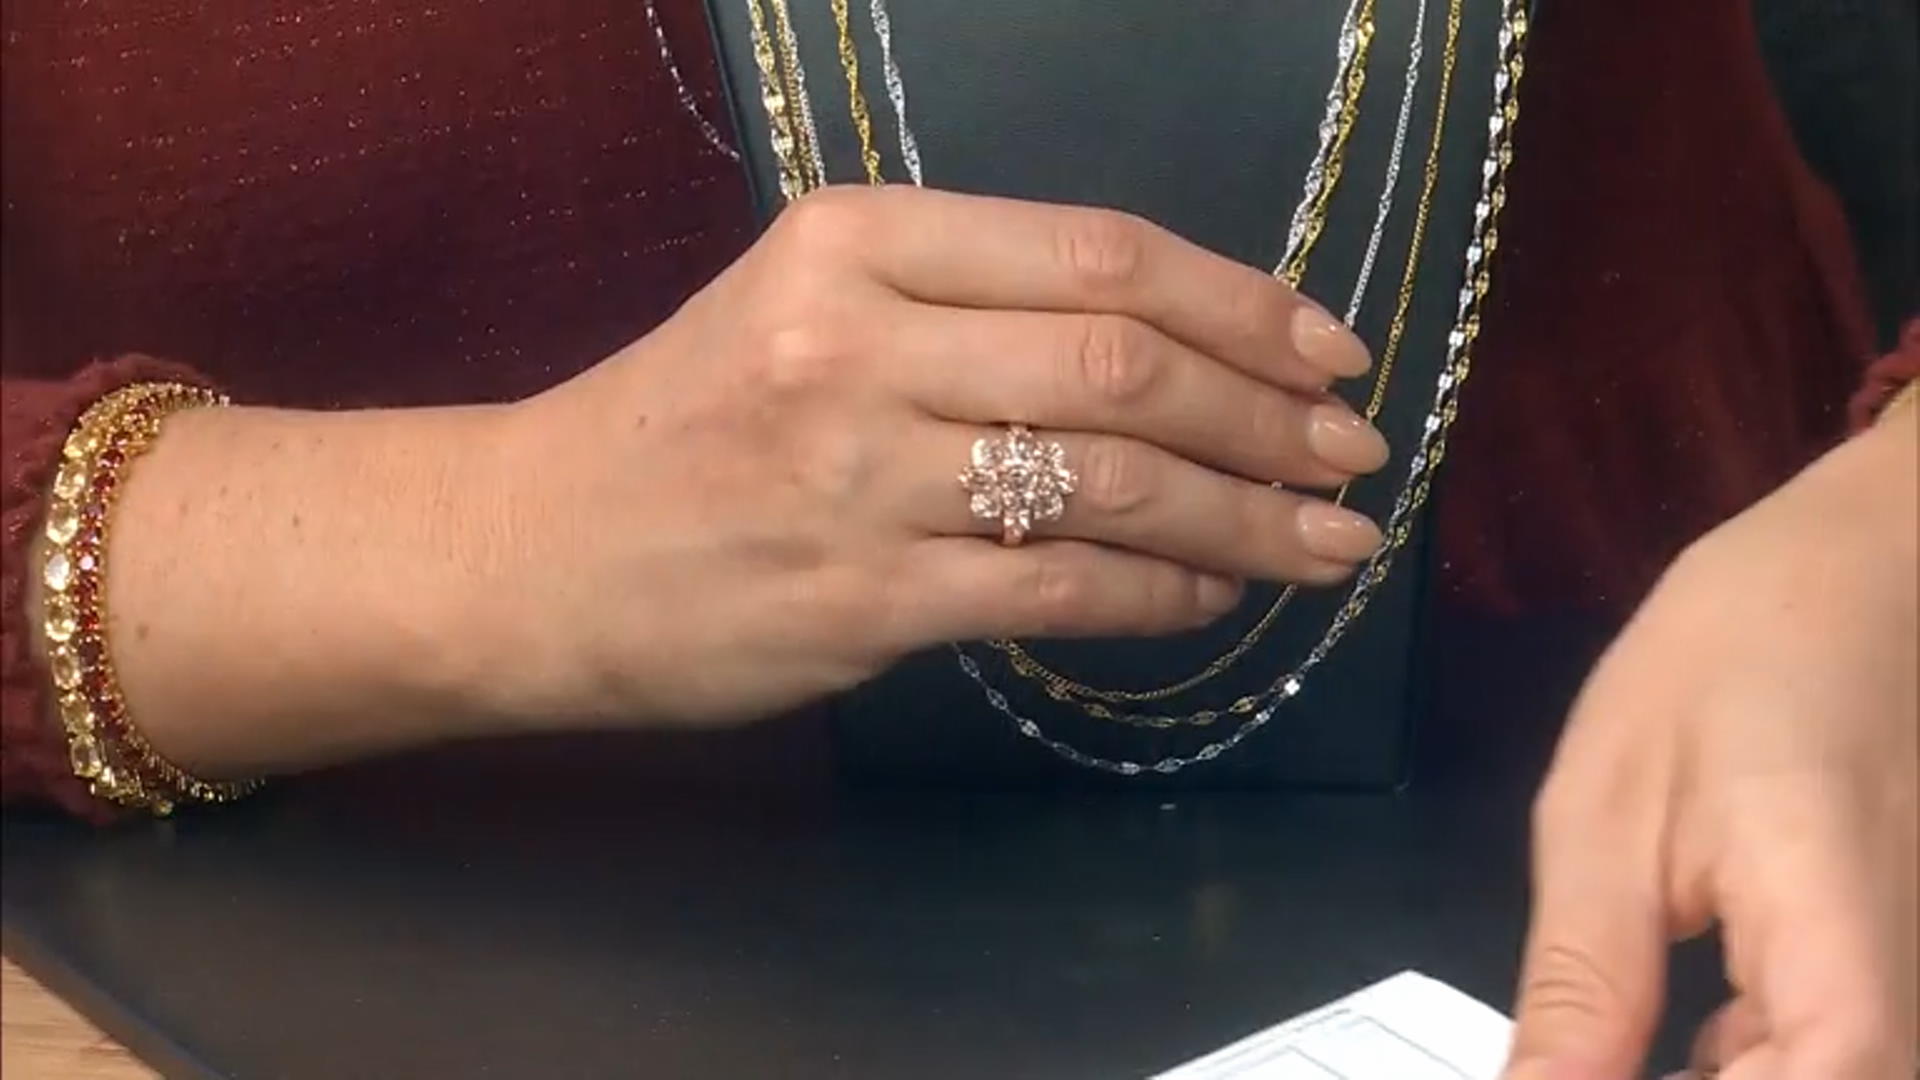 Morganite With White Zircon 18k Rose Gold Over Sterling Silver 2.09ctw Video Thumbnail